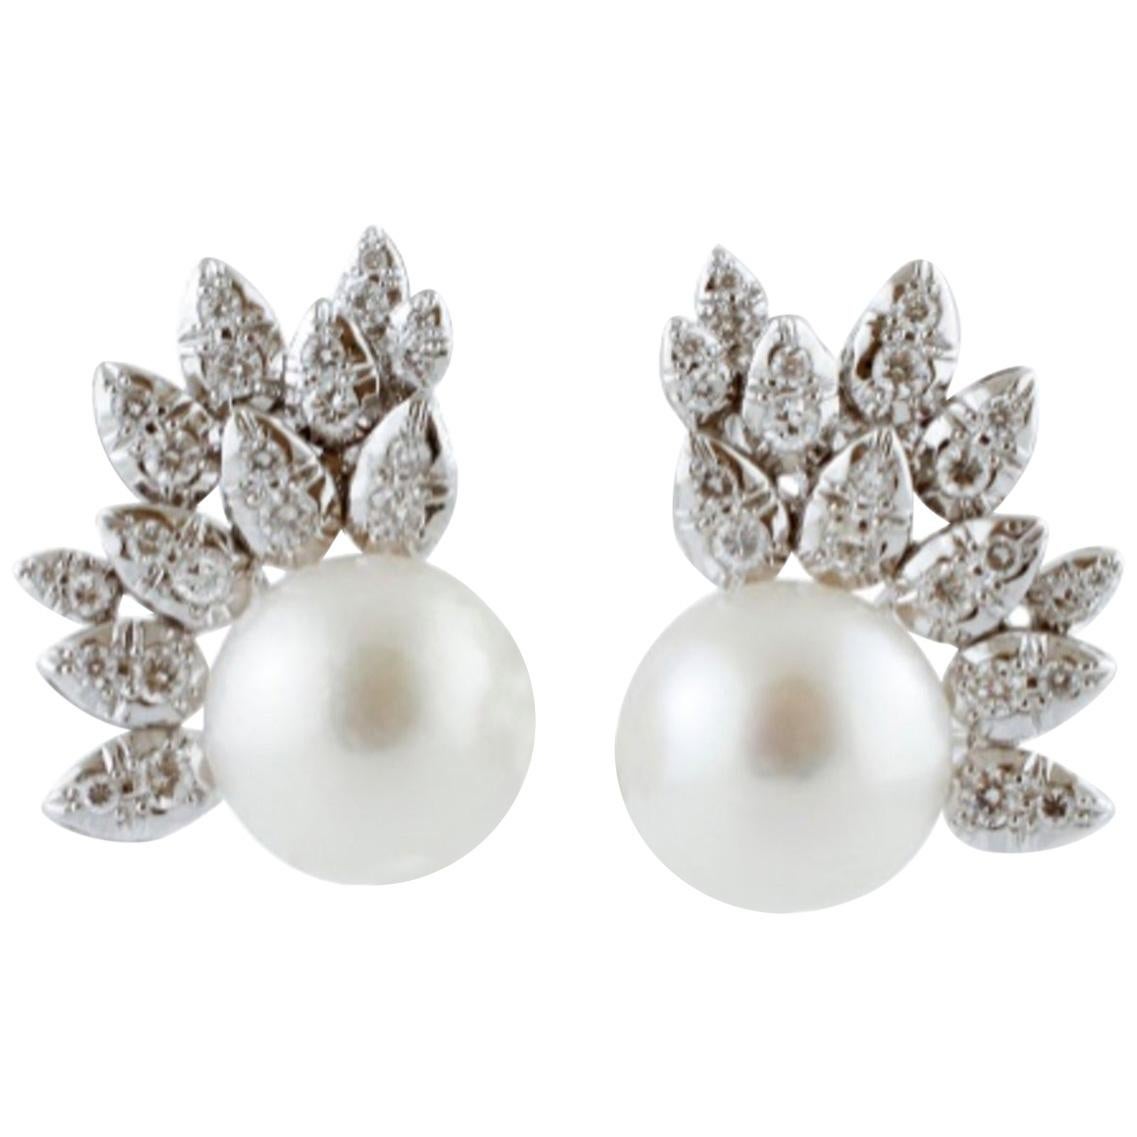 Handcrafted Earrings South Sea Pearls, Diamonds, in 14 Karat White Gold